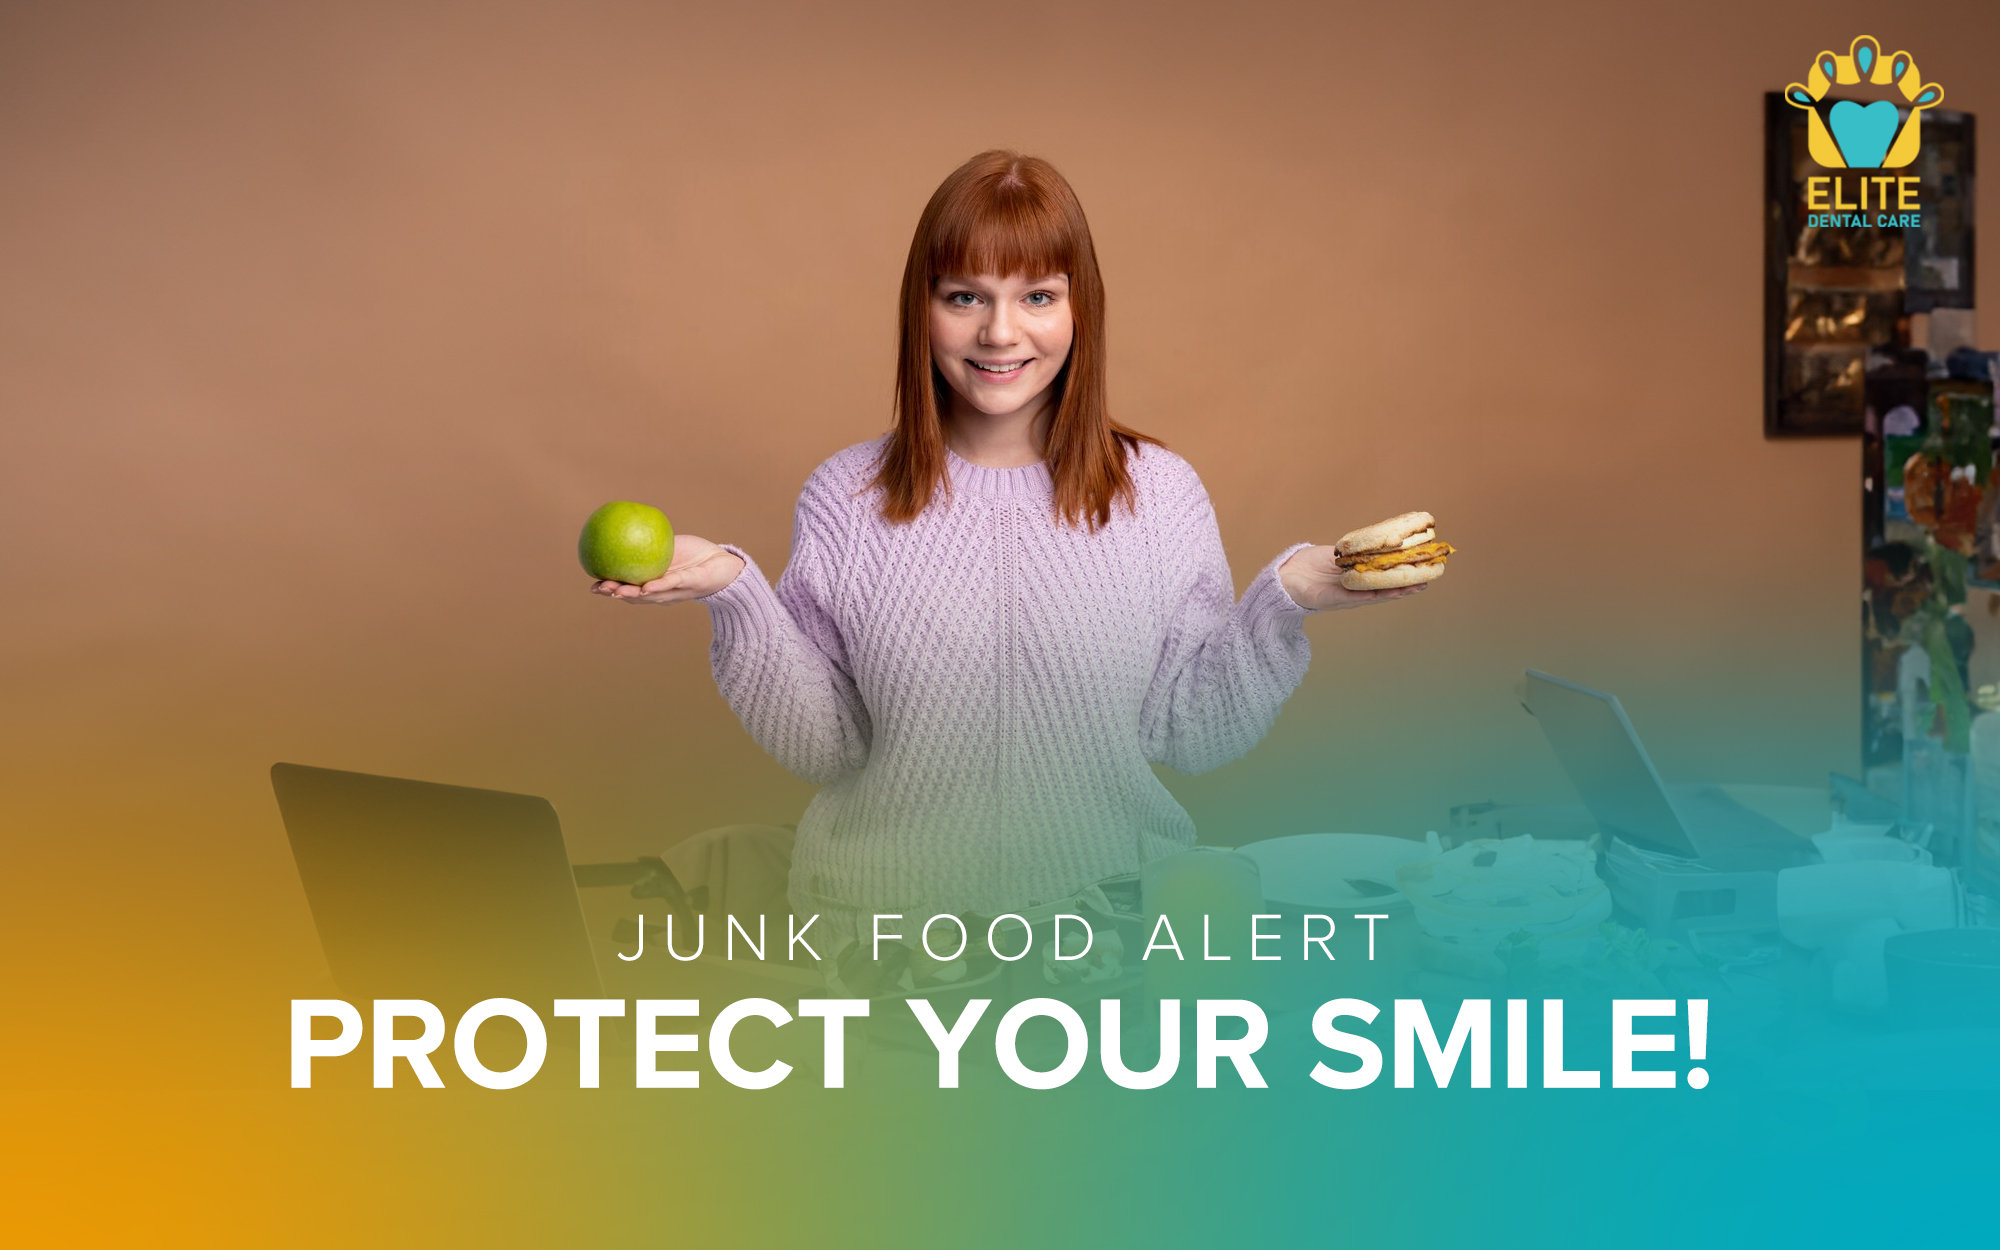 Junk Food Alert: Protect Your Smile!